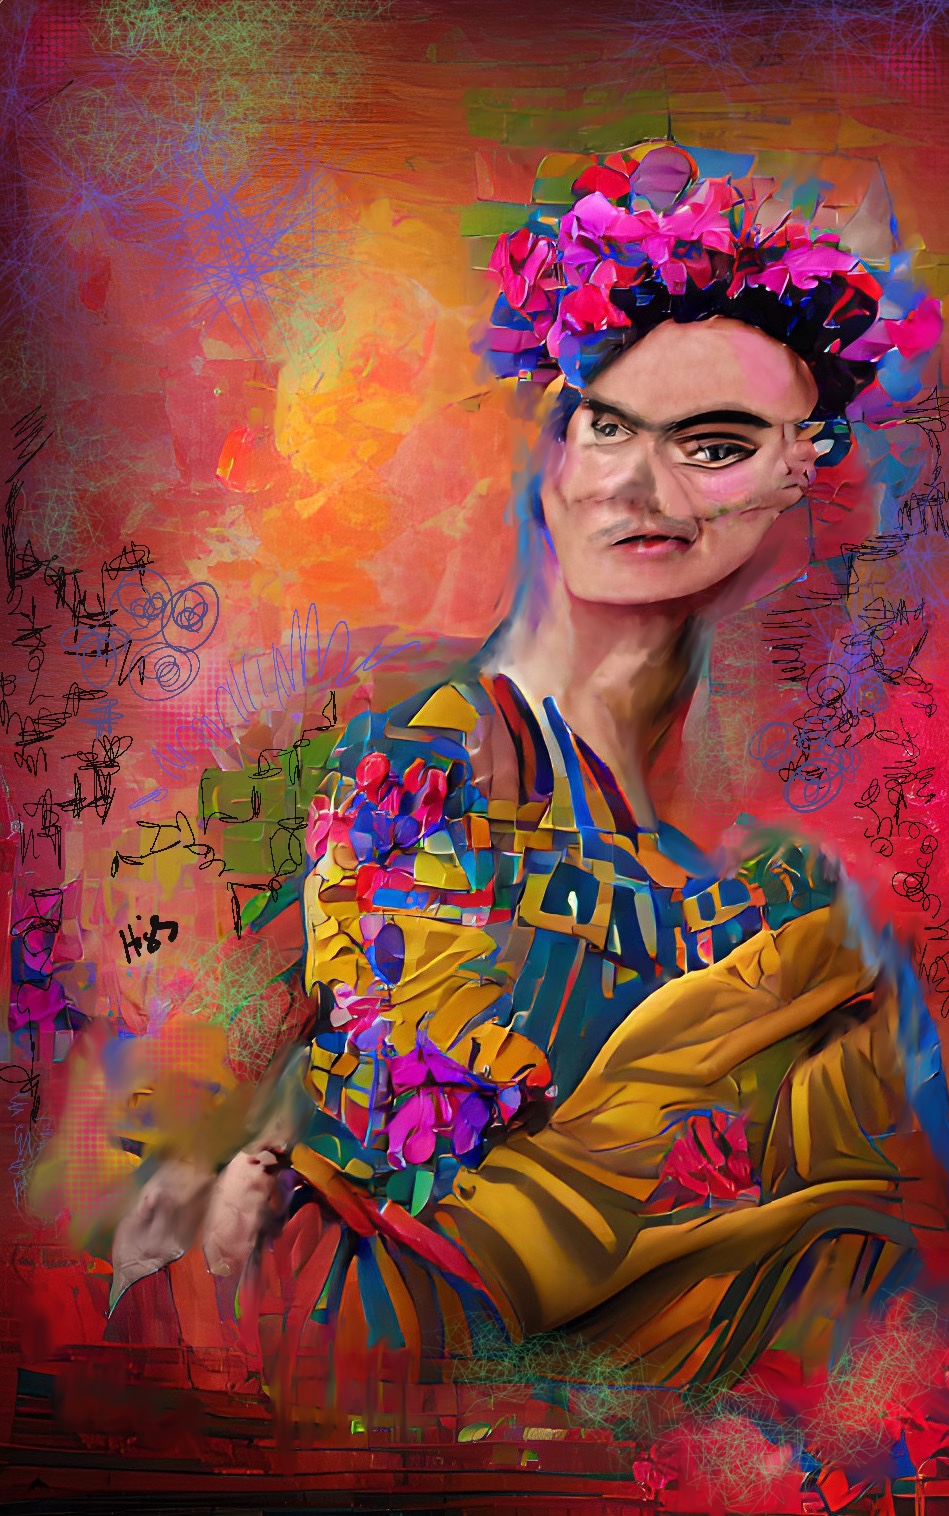 The Most Famous Unibrow - You Go Frida!